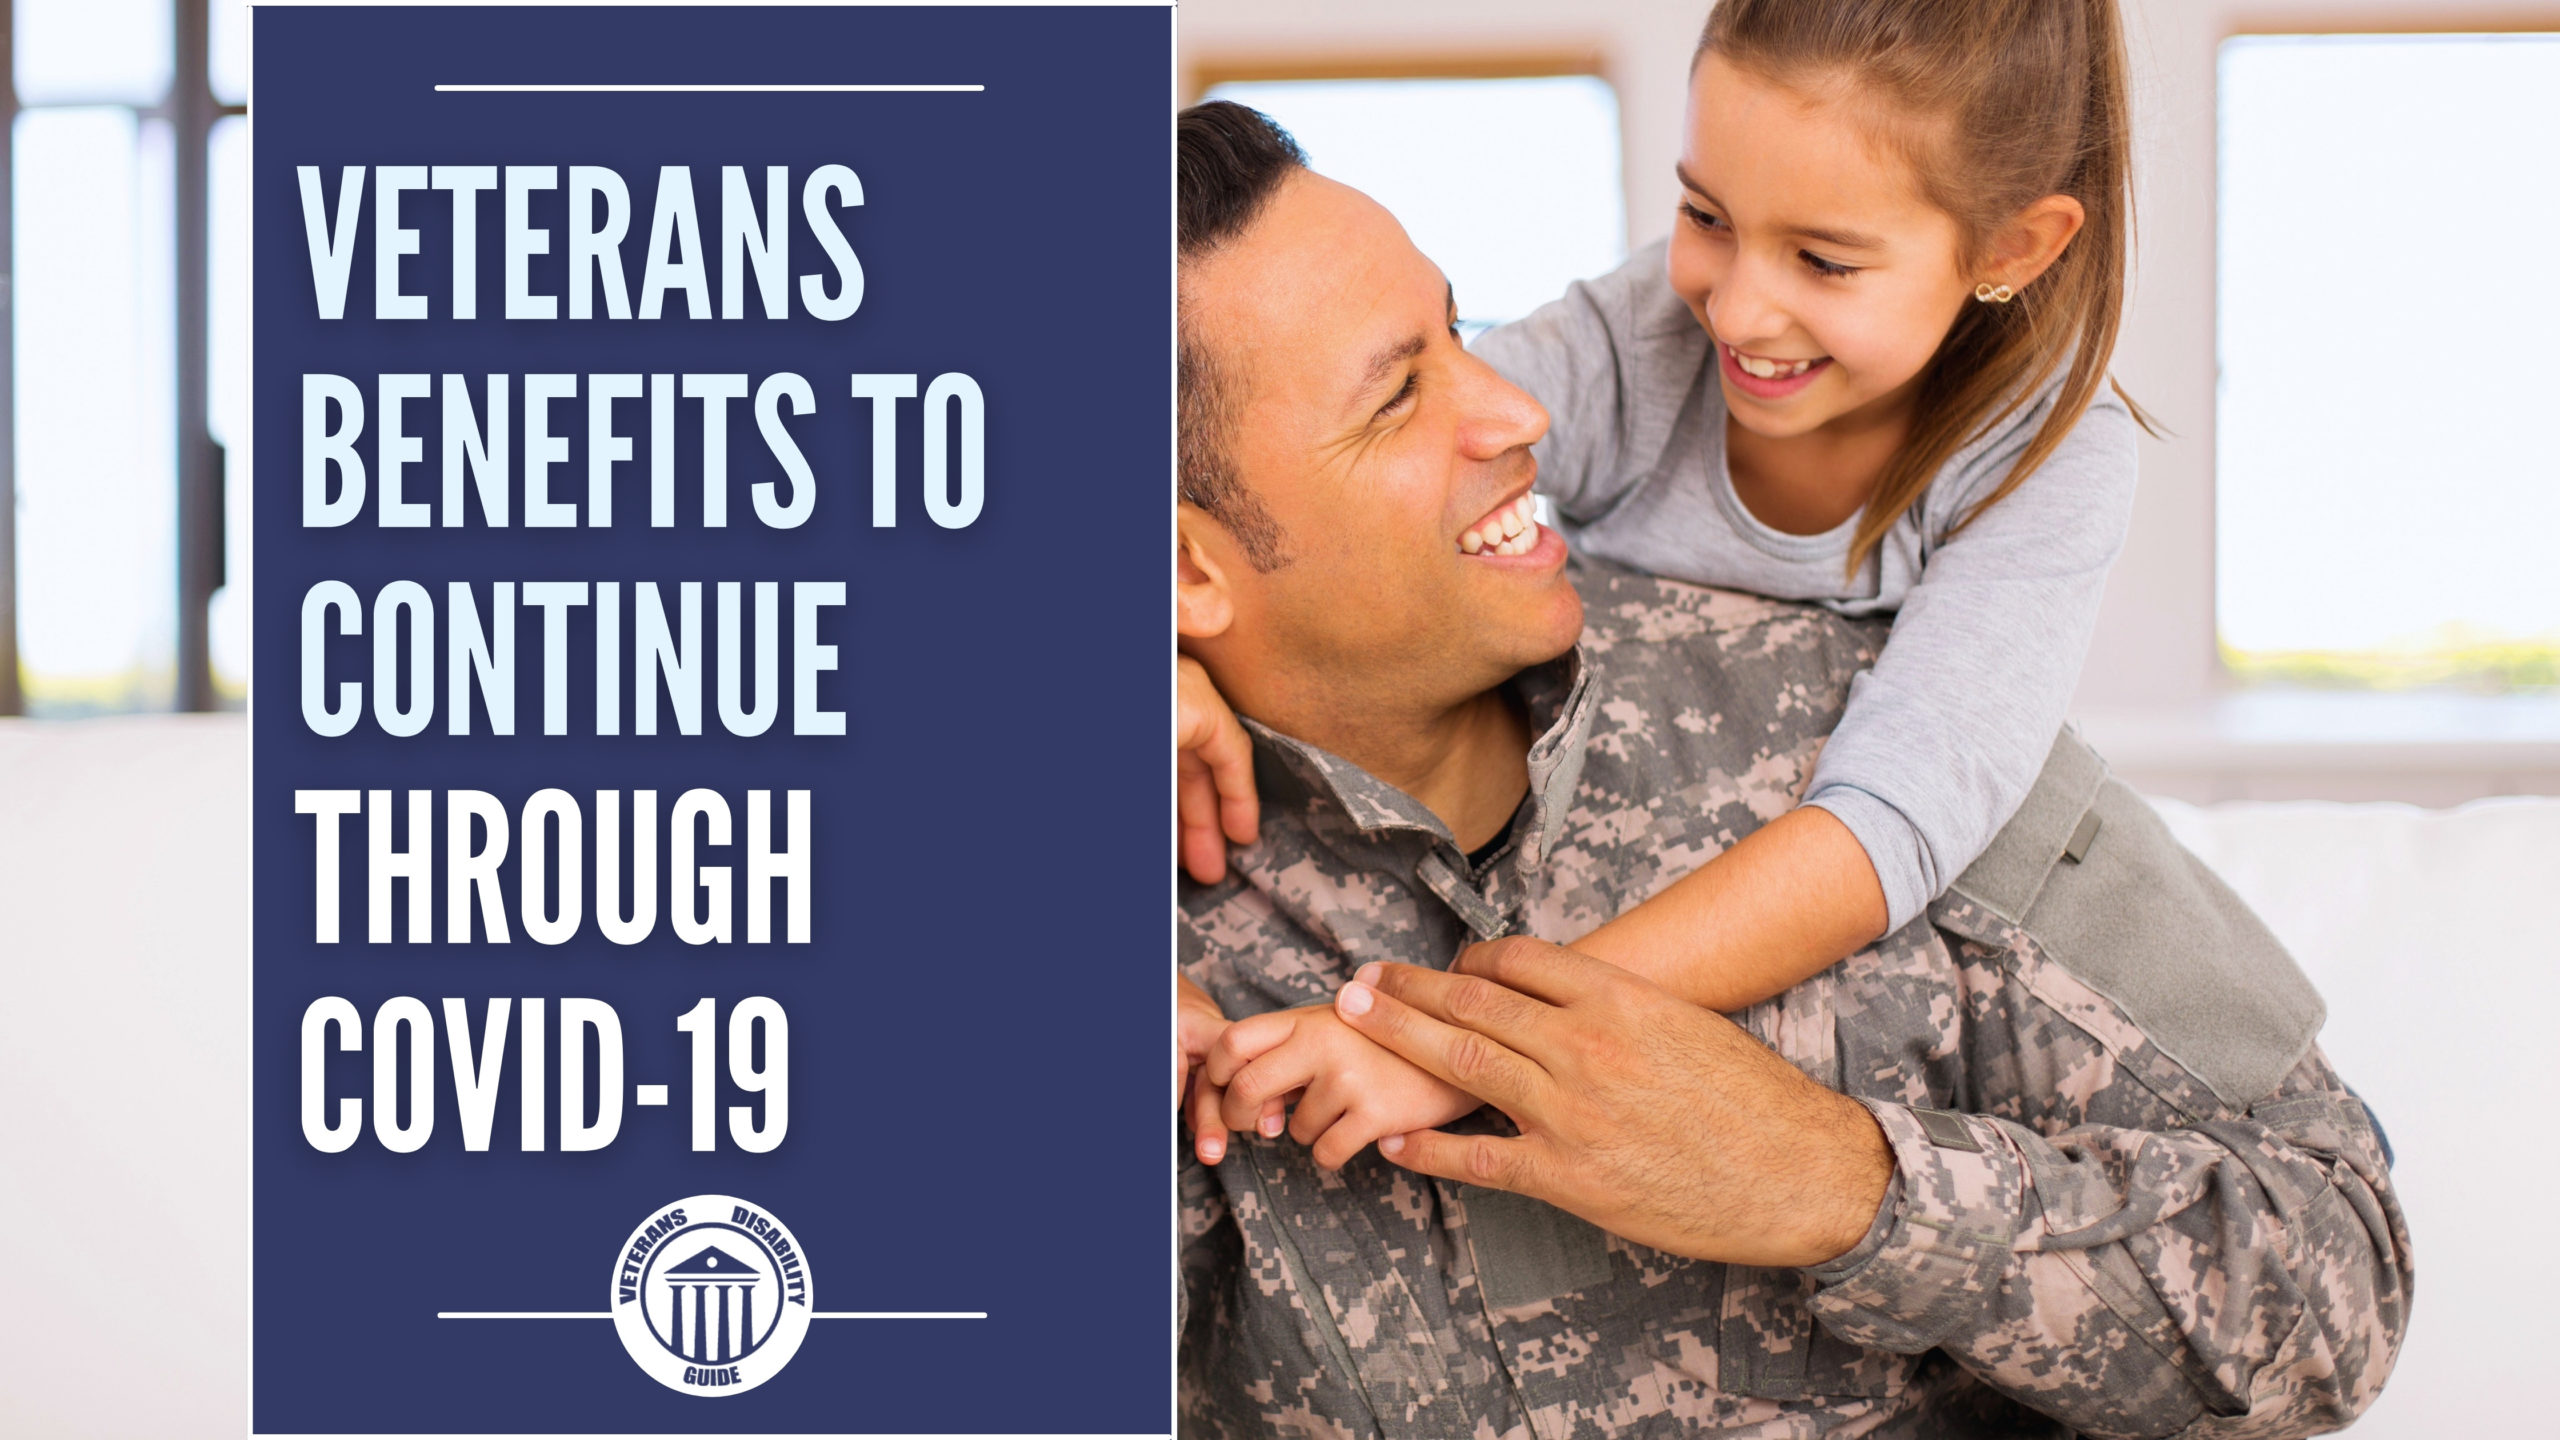 Veterans Benefits To Continue Through COVID-19 blog header image